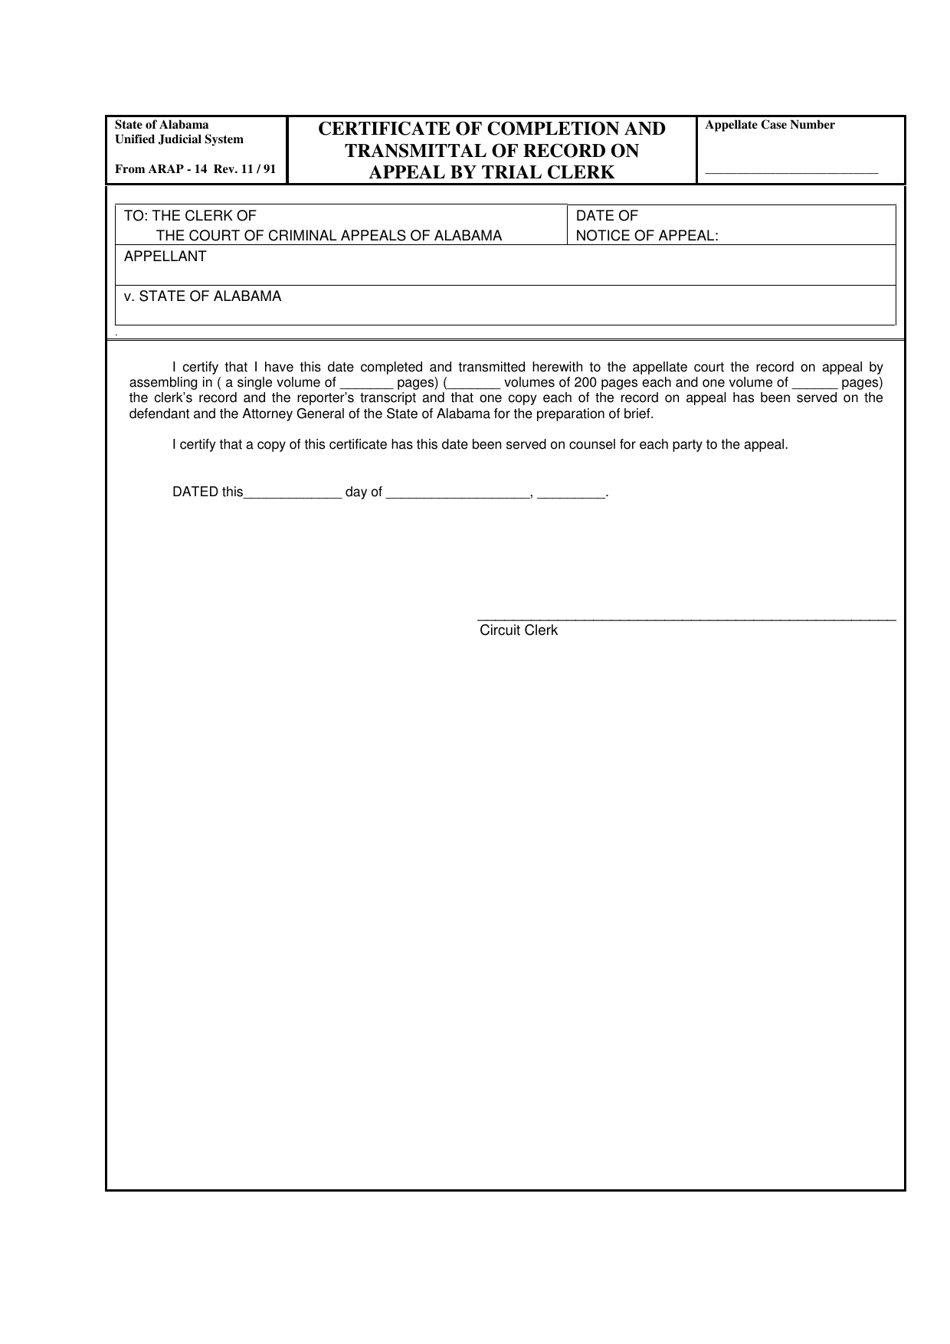 Form ARAP-14 Certificate of Completion and Transmittal of Record on Appeal by Trial Clerk - Alabama, Page 1